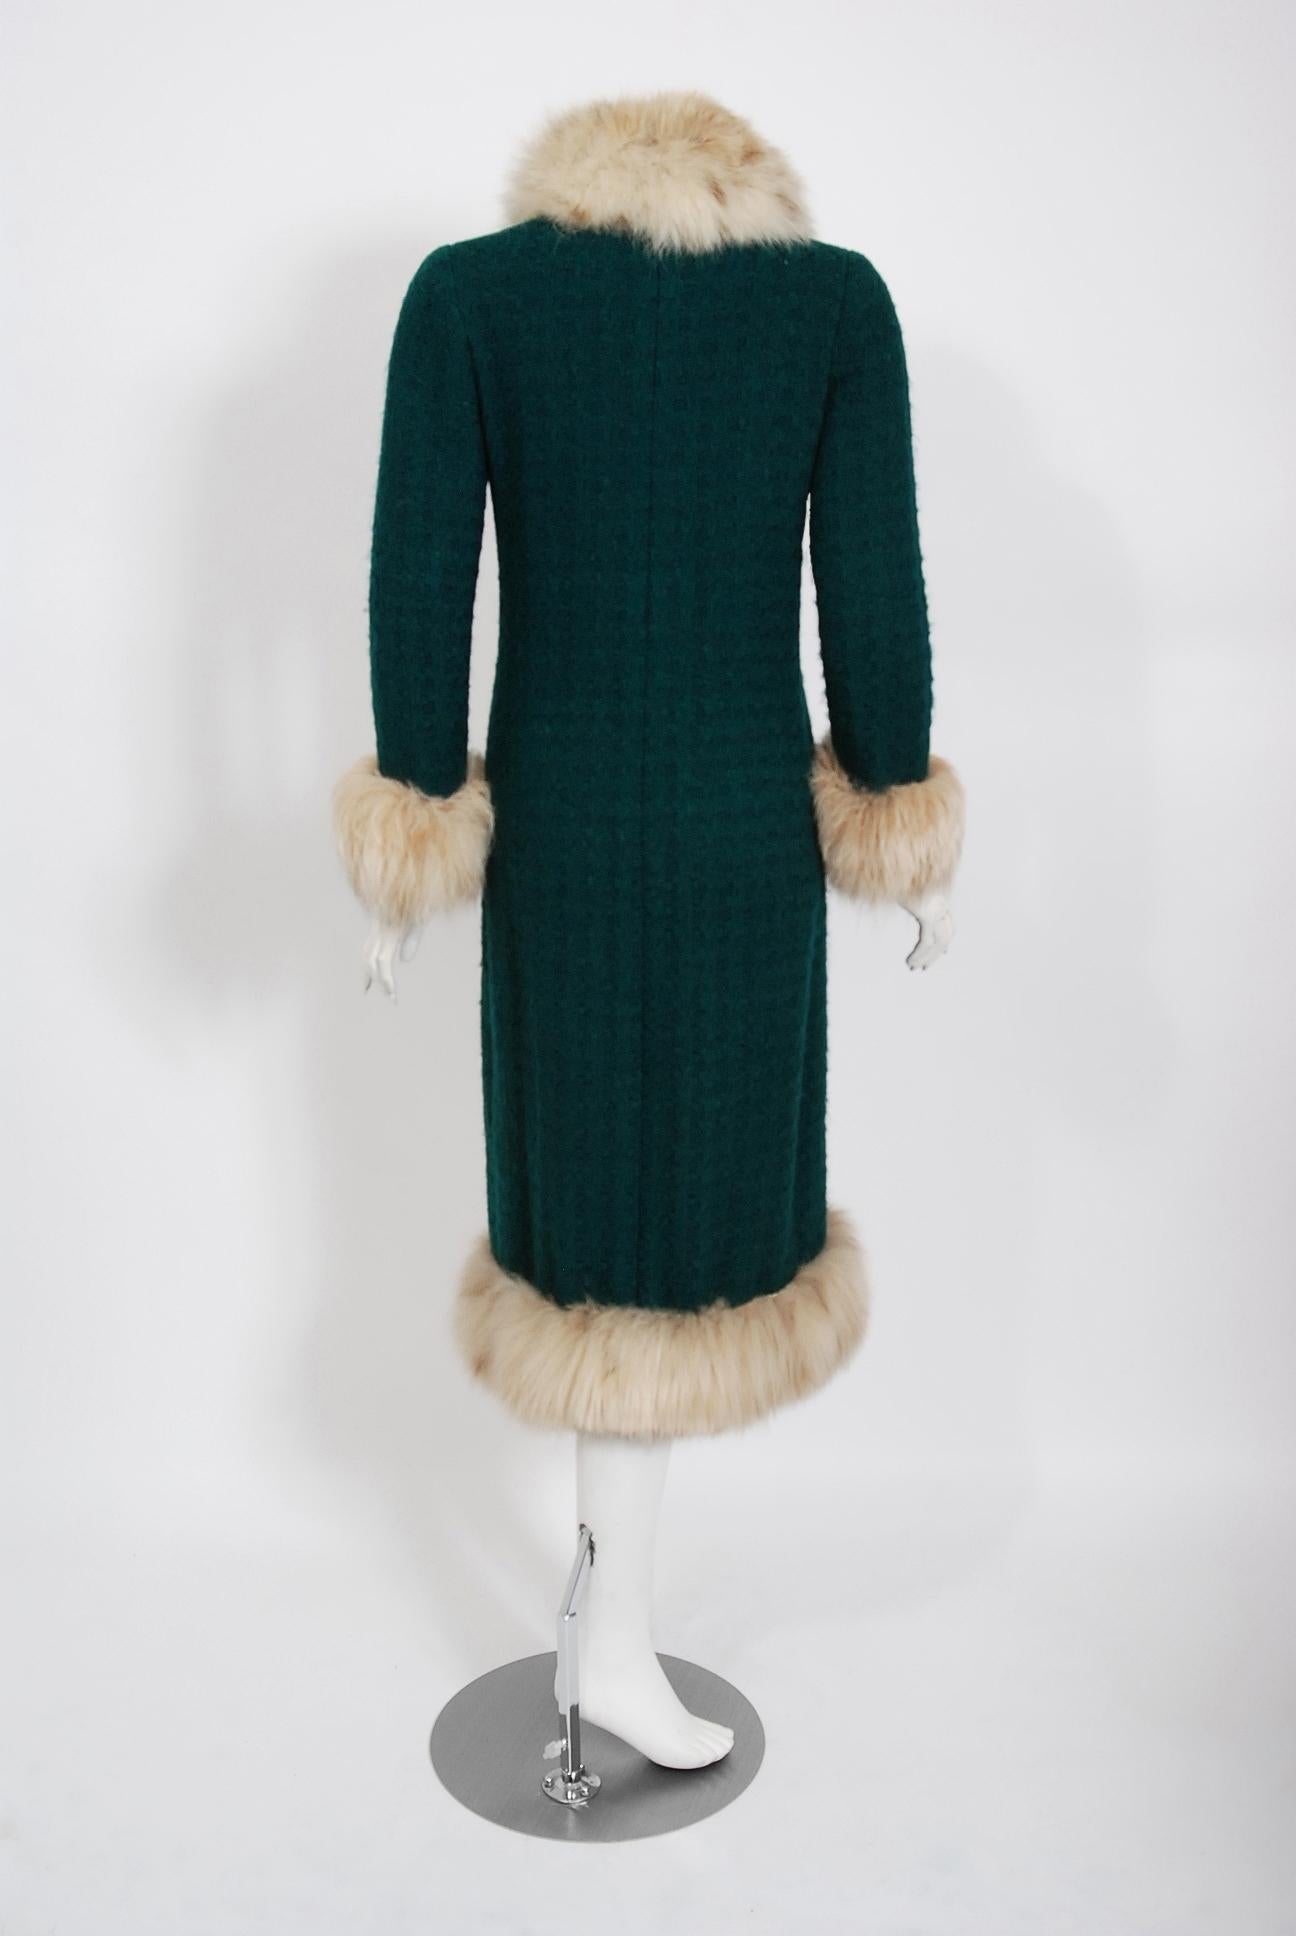 Vintage 1974 Chanel Haute-Couture Forest Green Boucle Wool & Fox-Fur Jacket Coat 2